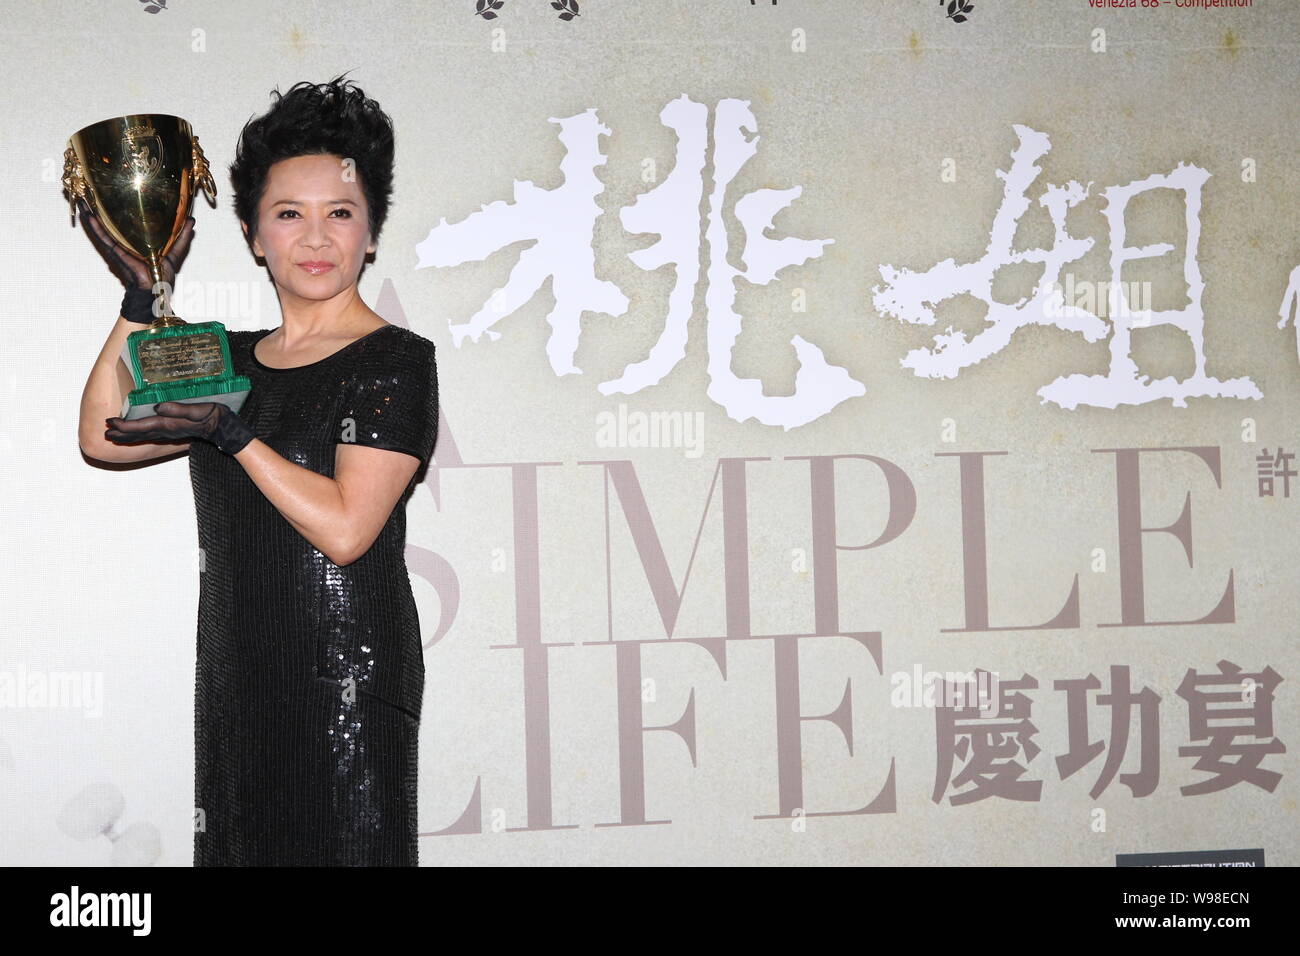 Hongkong singer and actress Deanie Ip Tak-han, winner of the Best Actress award of the 68th Venice International Film Festival, shows her trophy durin Stock Photo